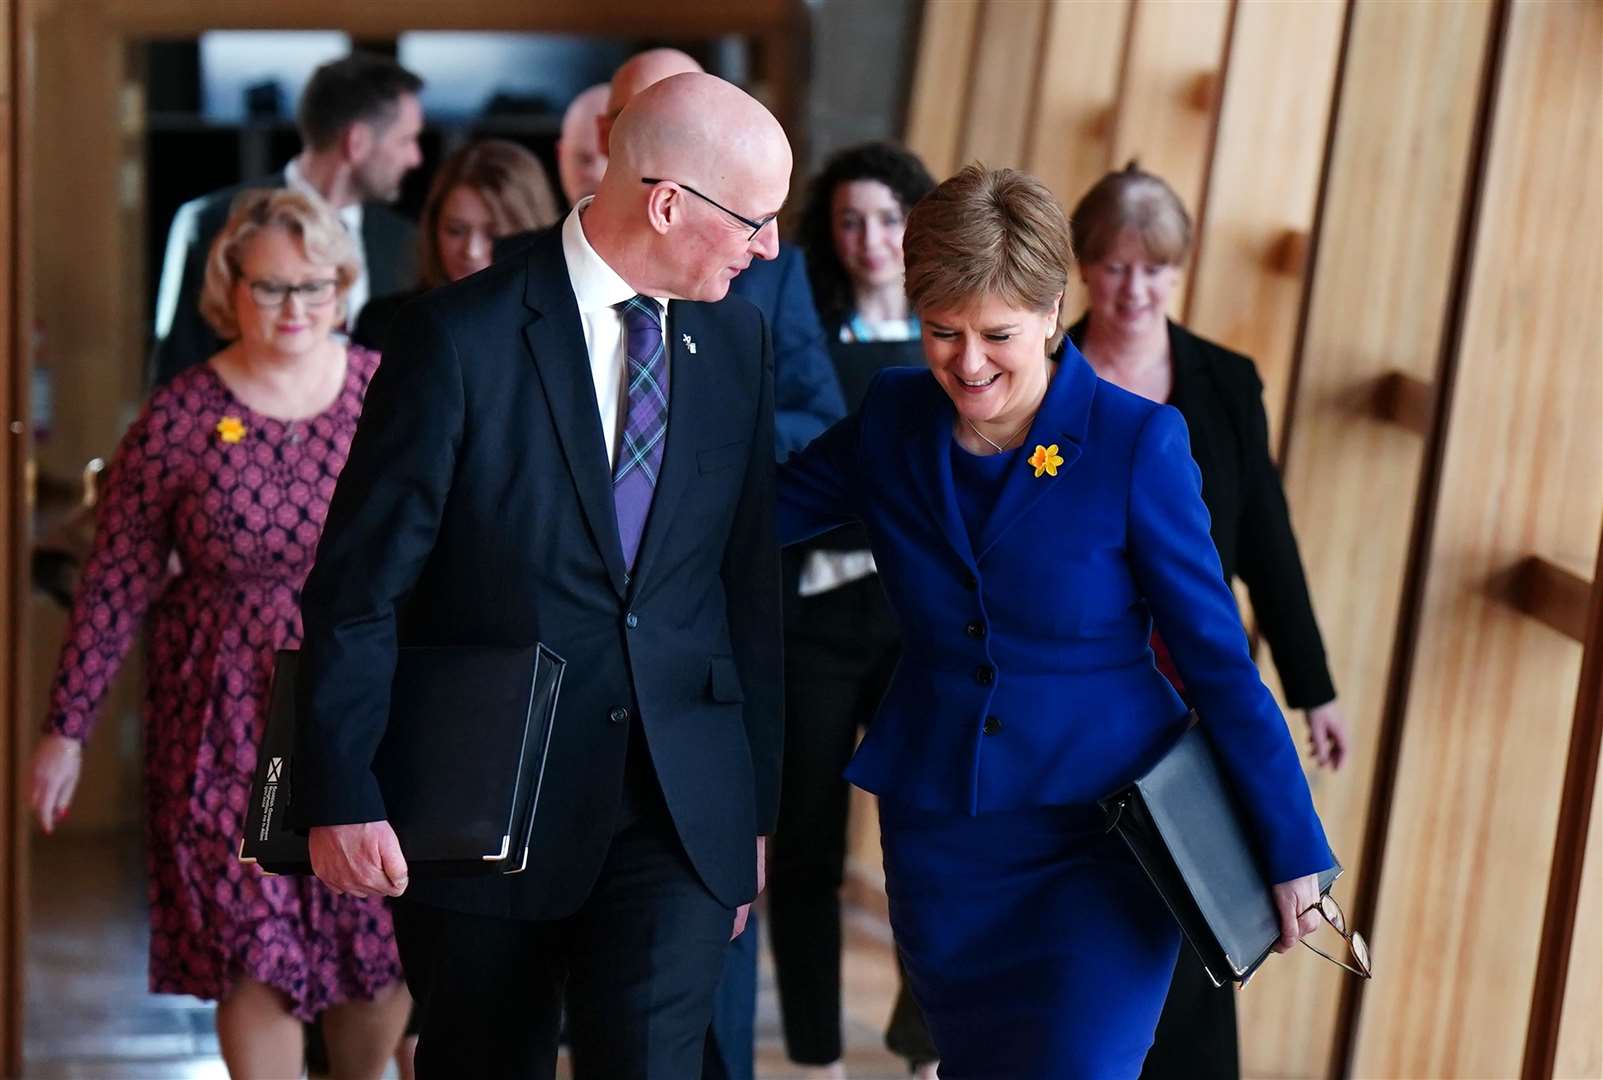 Ms Sturgeon was accompanied by Deputy First Minister John Swinney, who is also stepping down next week, as she arrived for First Minister’s Questions (Jane Barlow/PA)